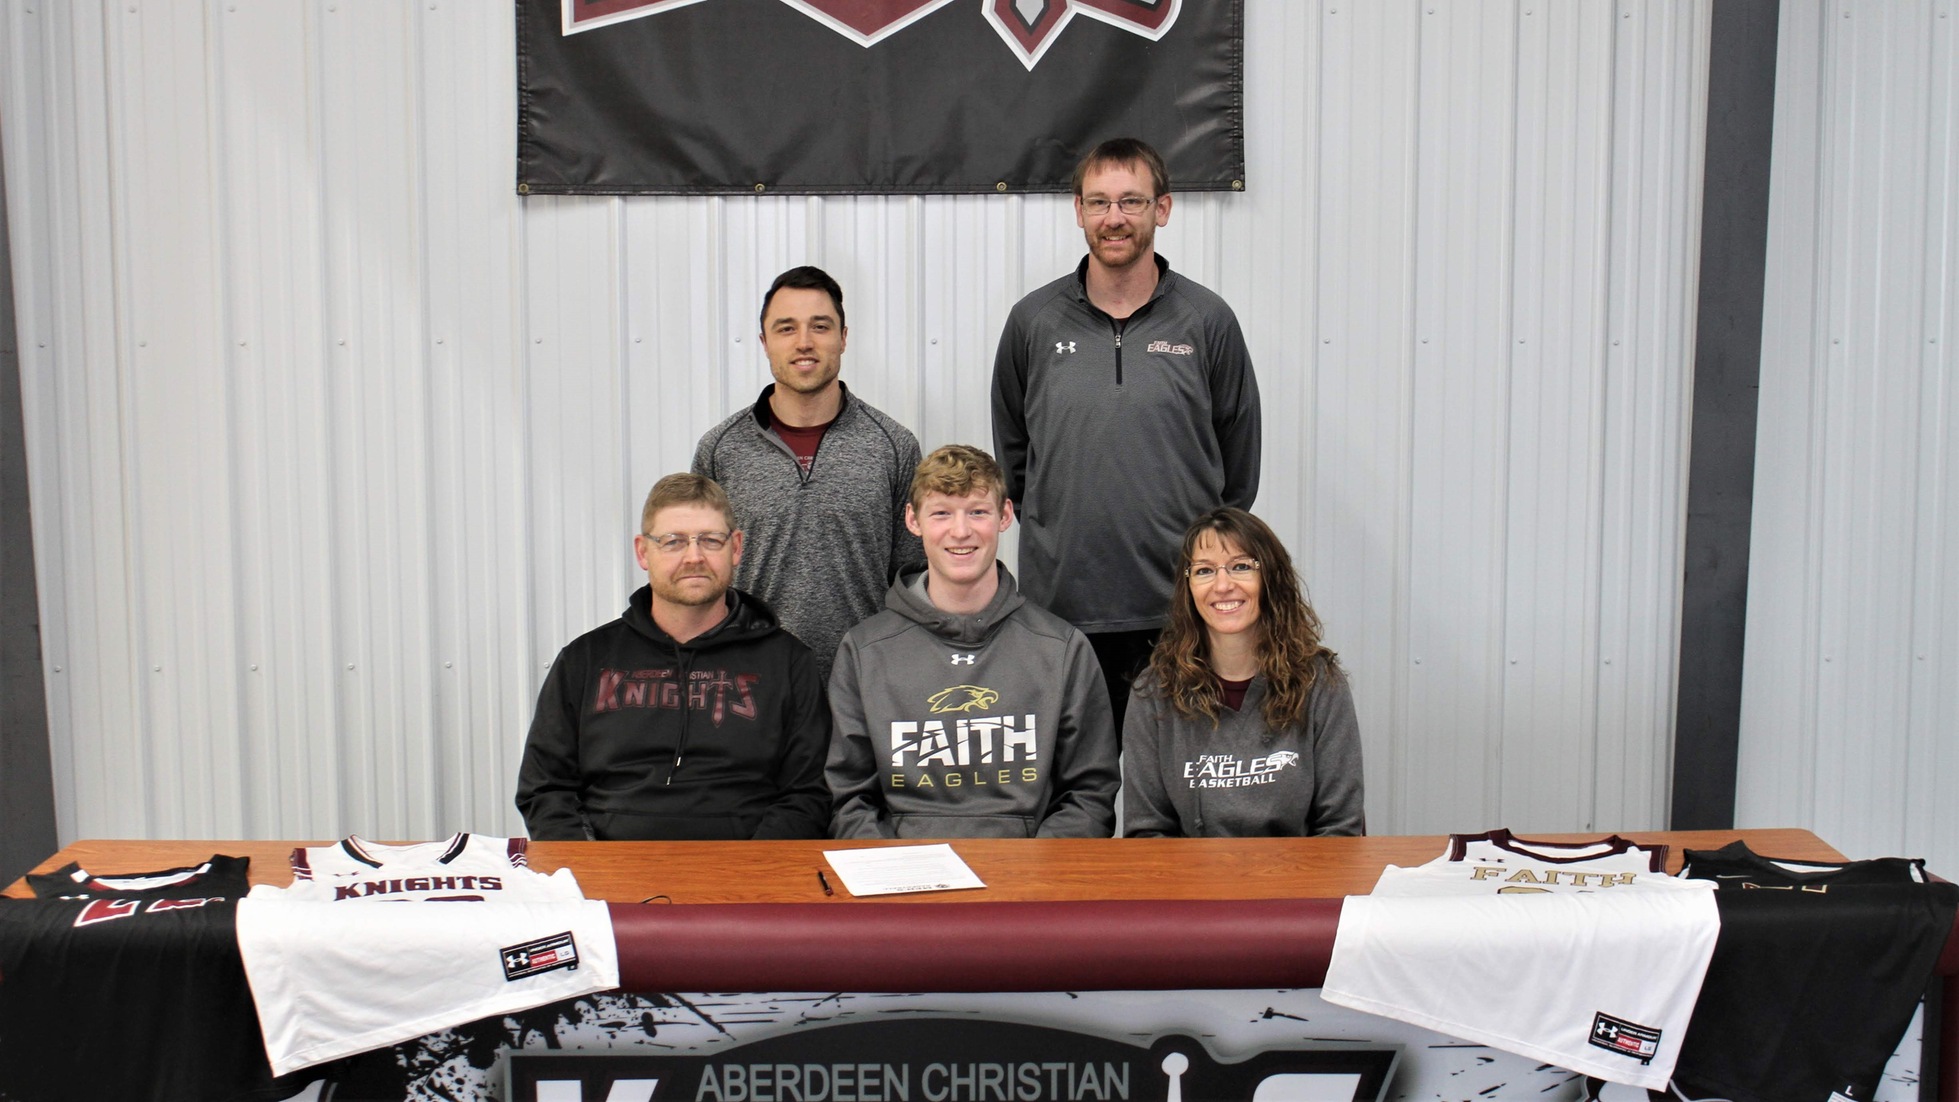 Jared Pearson Signs with Faith Eagles